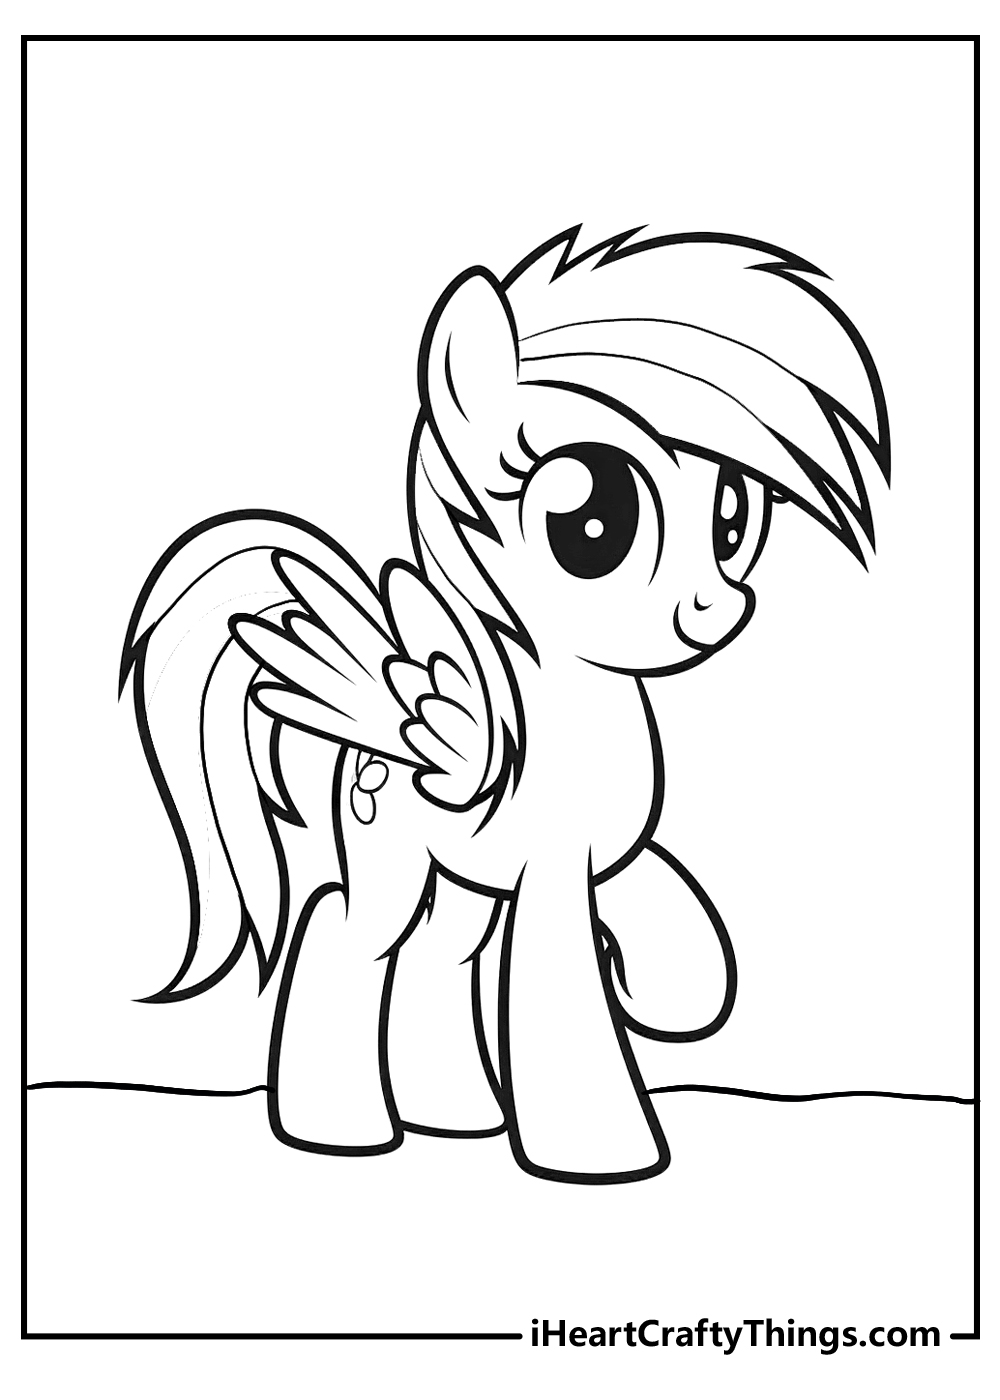 my little pony para colorir 04  My little pony coloring, My